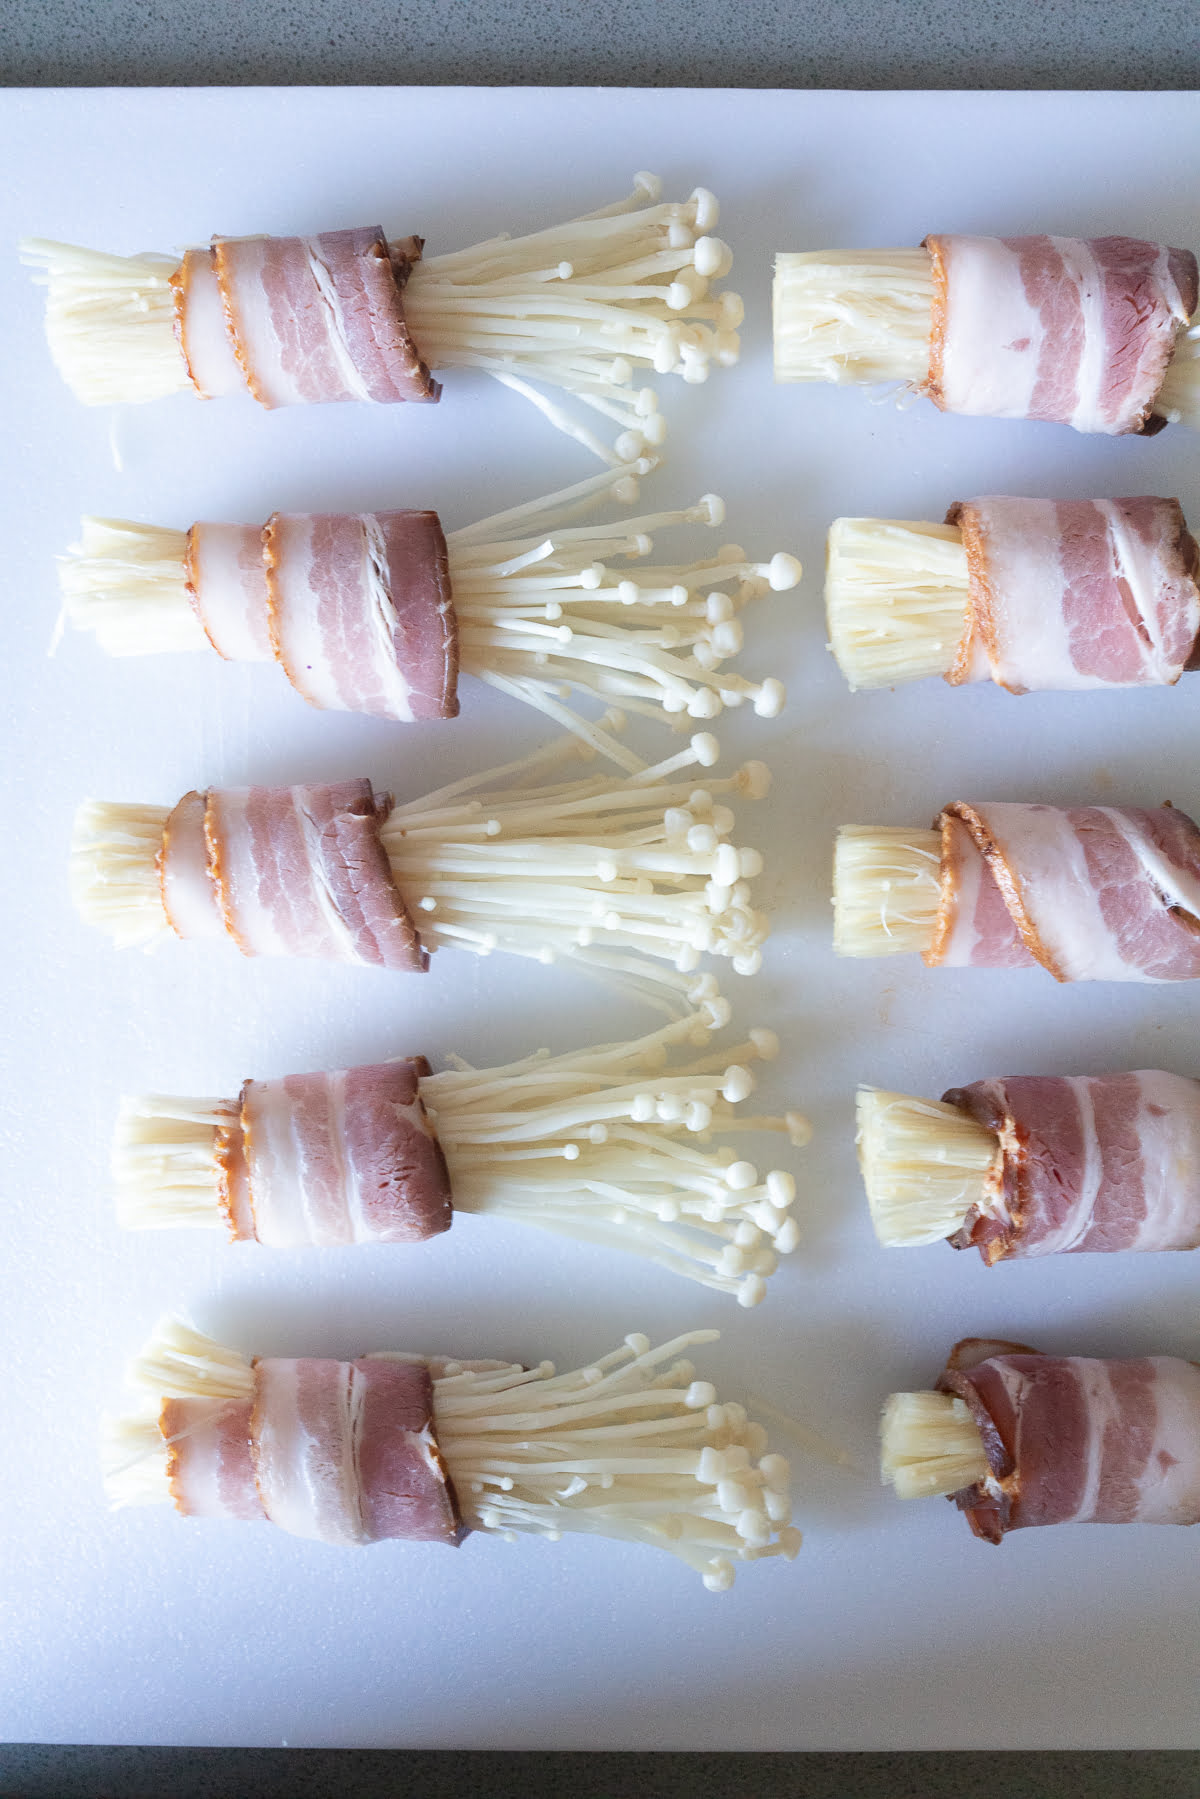 A plate of bacon wrapped enoki mushrooms, ready to be pan fried.